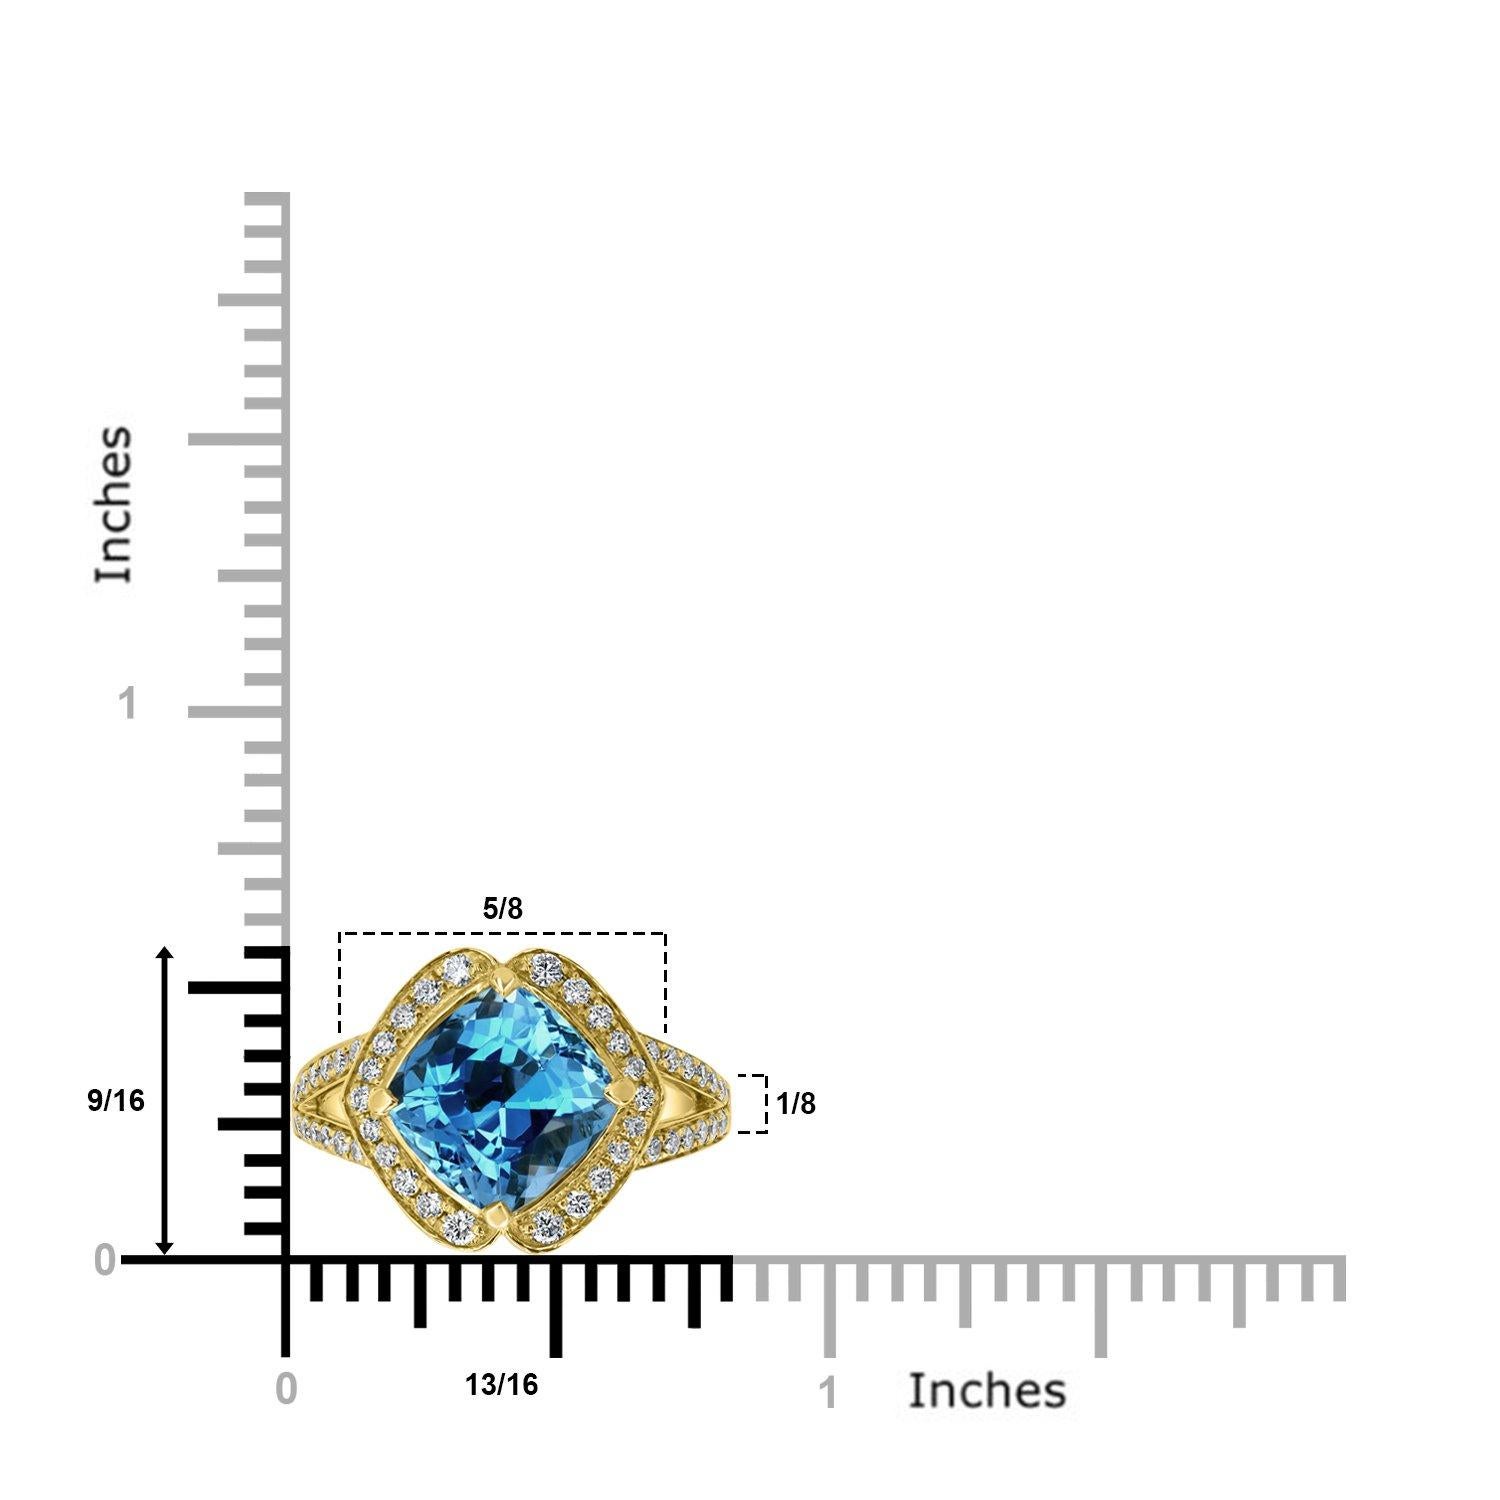 Crafted from 14k yellow gold, this charming ring is set with a cushion-cut Aquamarine and round Diamonds.

3.12ct Aquamarine Ring
0.42Tct Diamonds set
14K Yellow Gold
